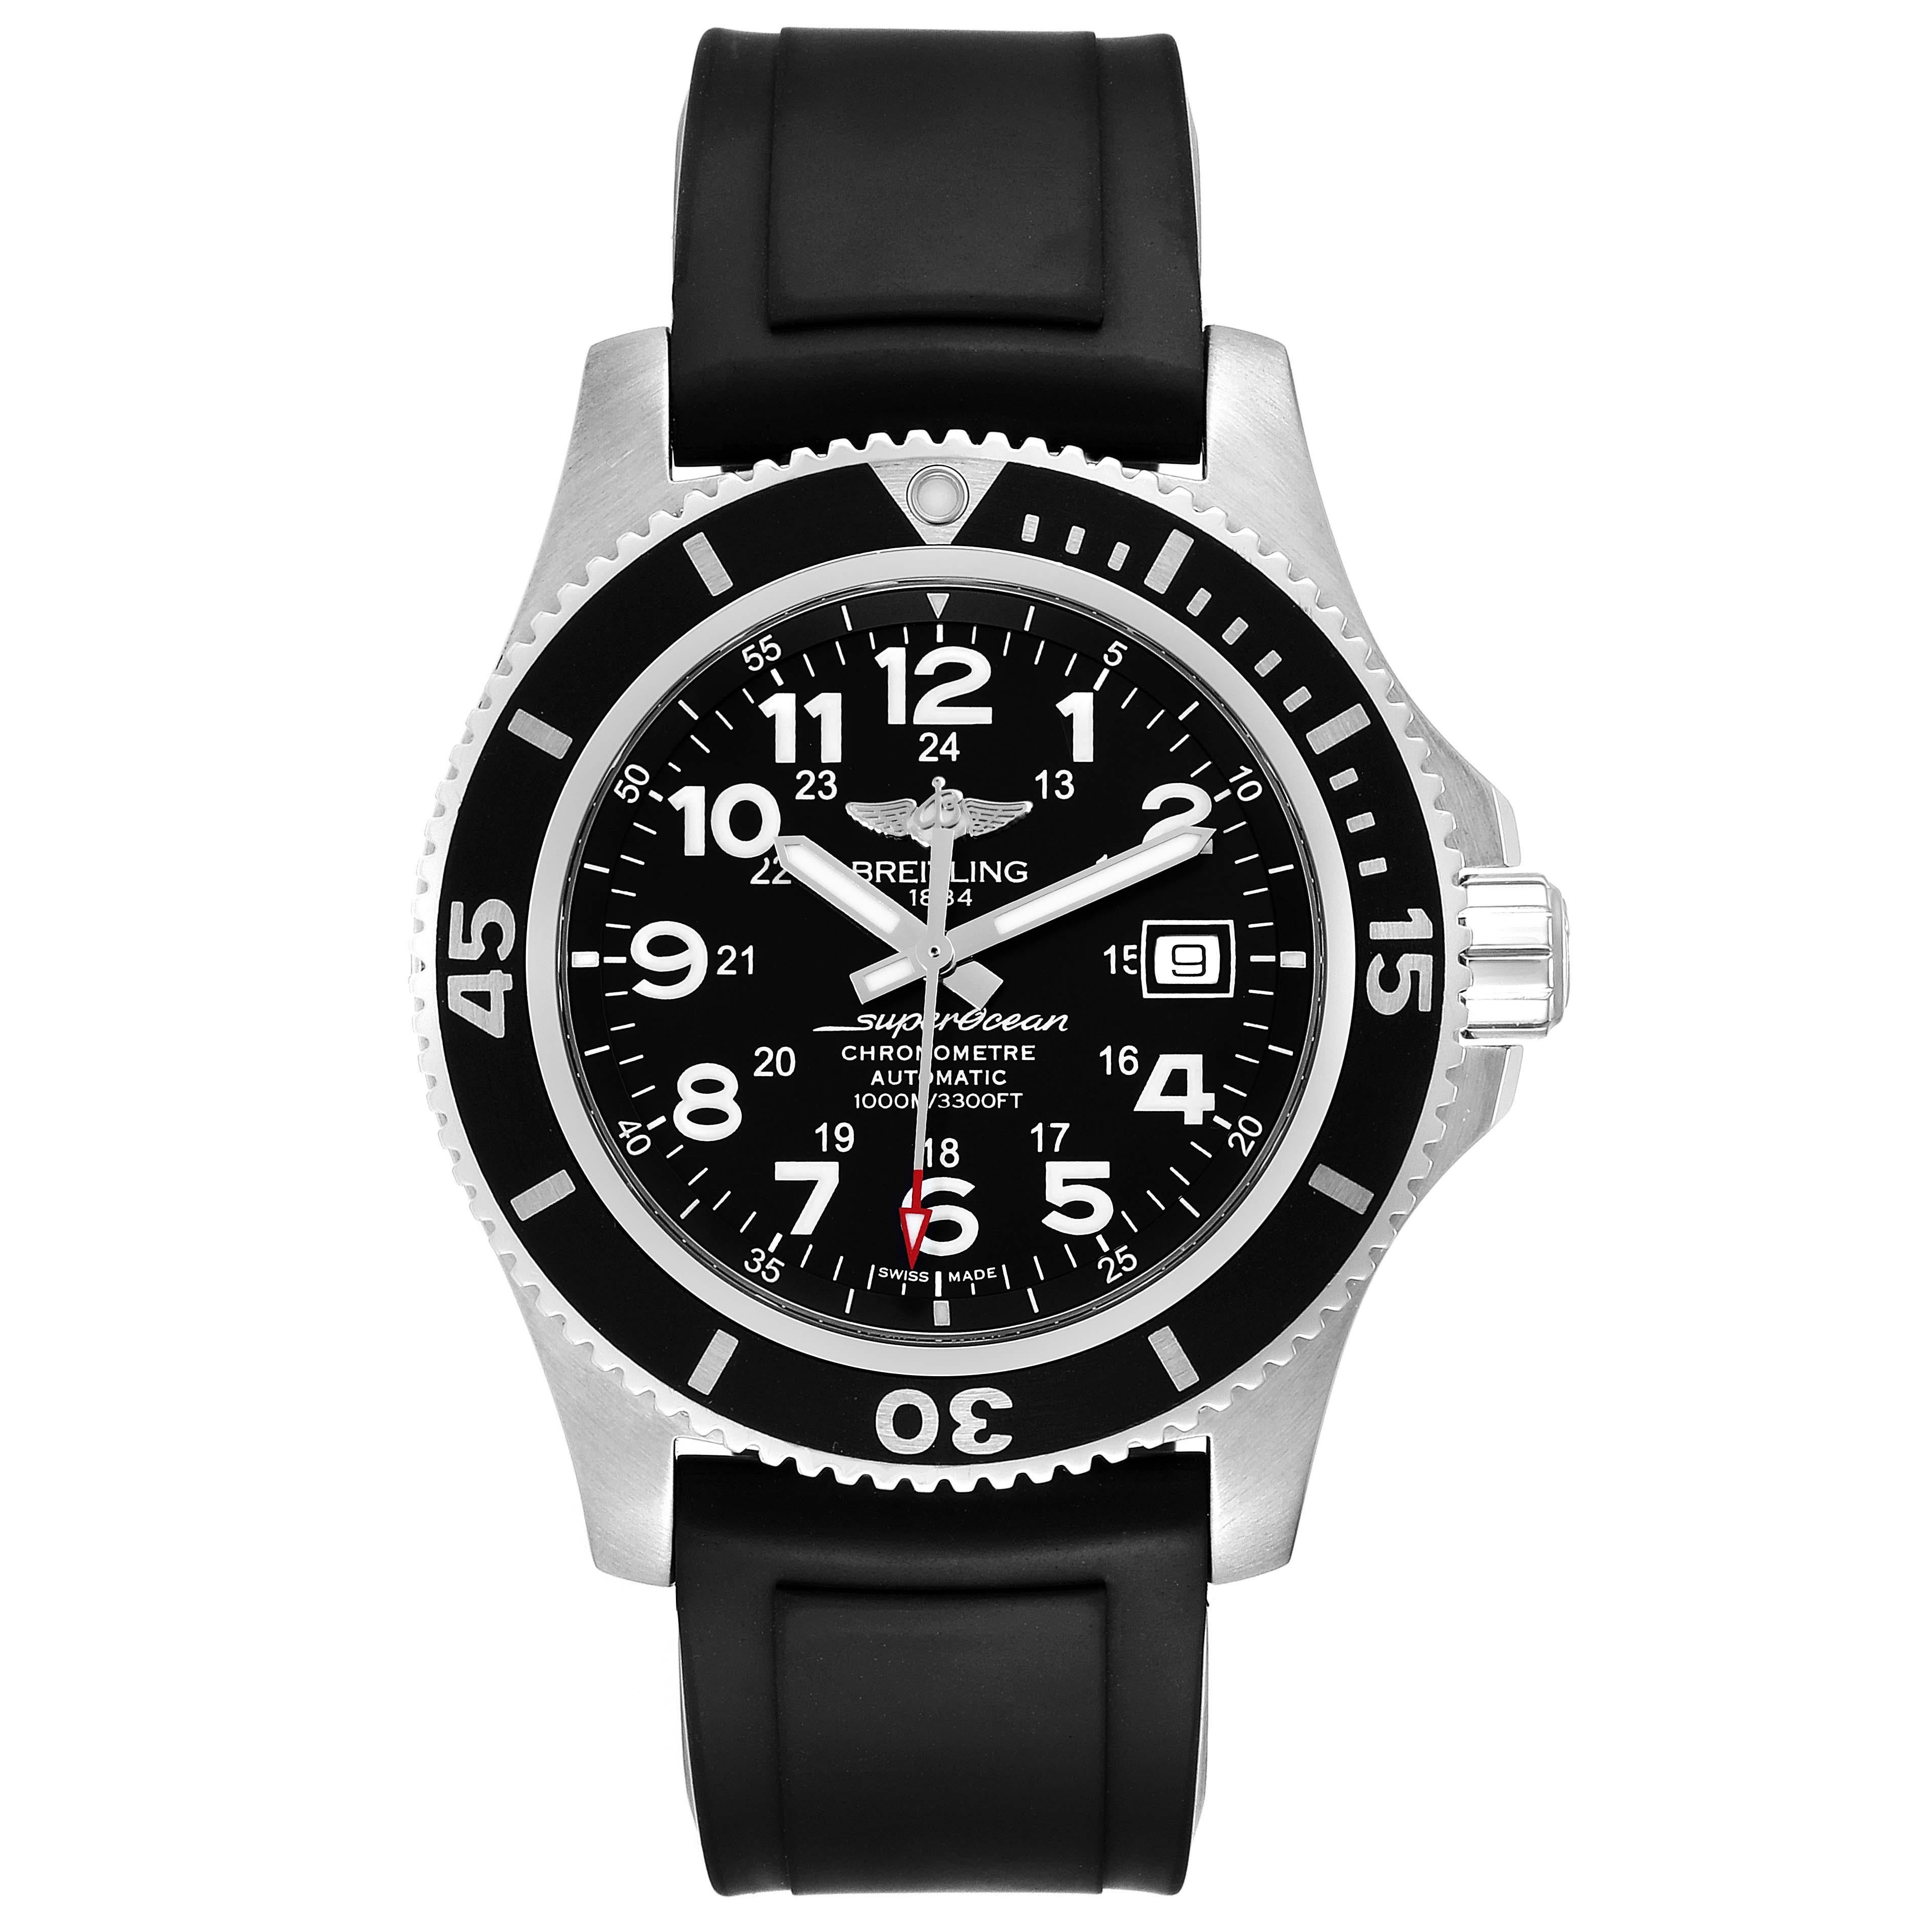 Breitling Superocean II 44 Black Dial Rubber Strap Mens Watch A17392. Authomatic self-winding movement. Stainless steel case 44.0 mm in diameter. Case thickness: 14.2 mm. Black stainless steel unidirectional revolving bezel. 0-60 elapsed-time.